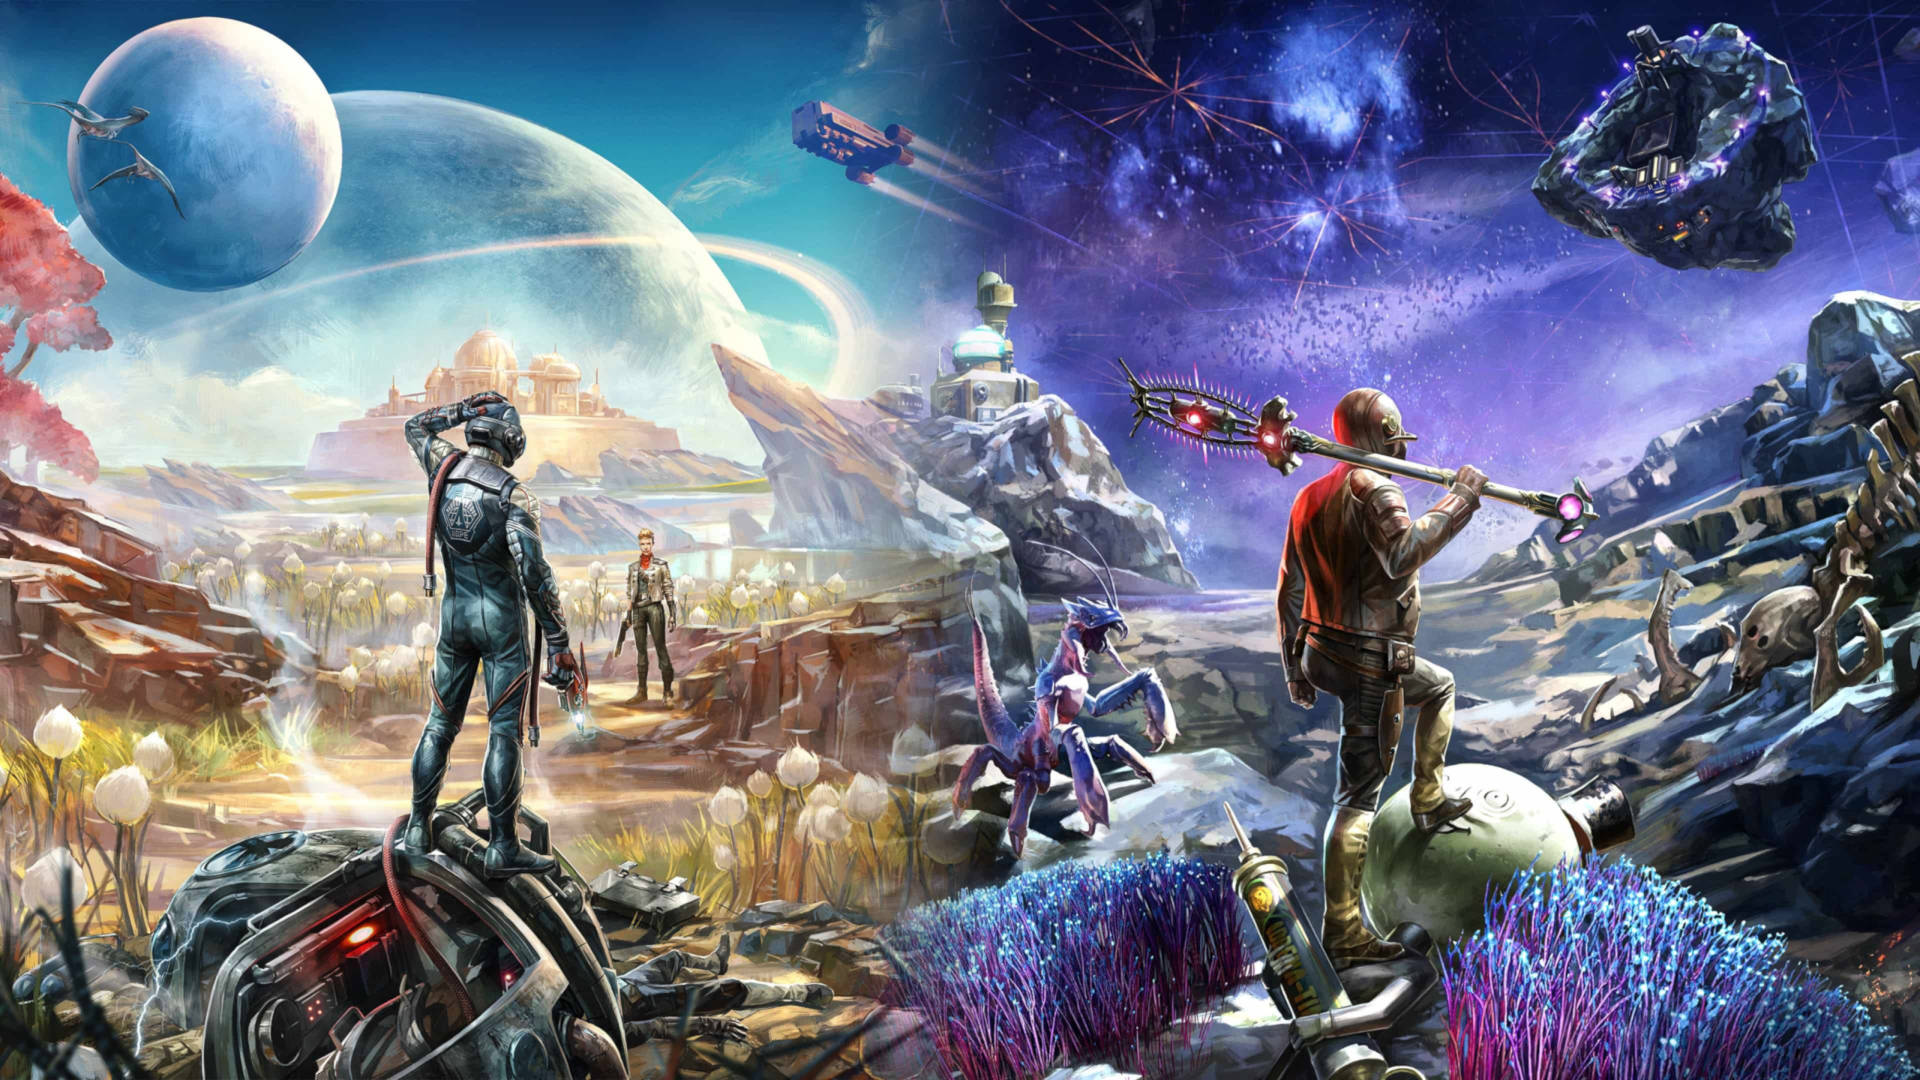 Futuristic Adventure In The Outer Worlds